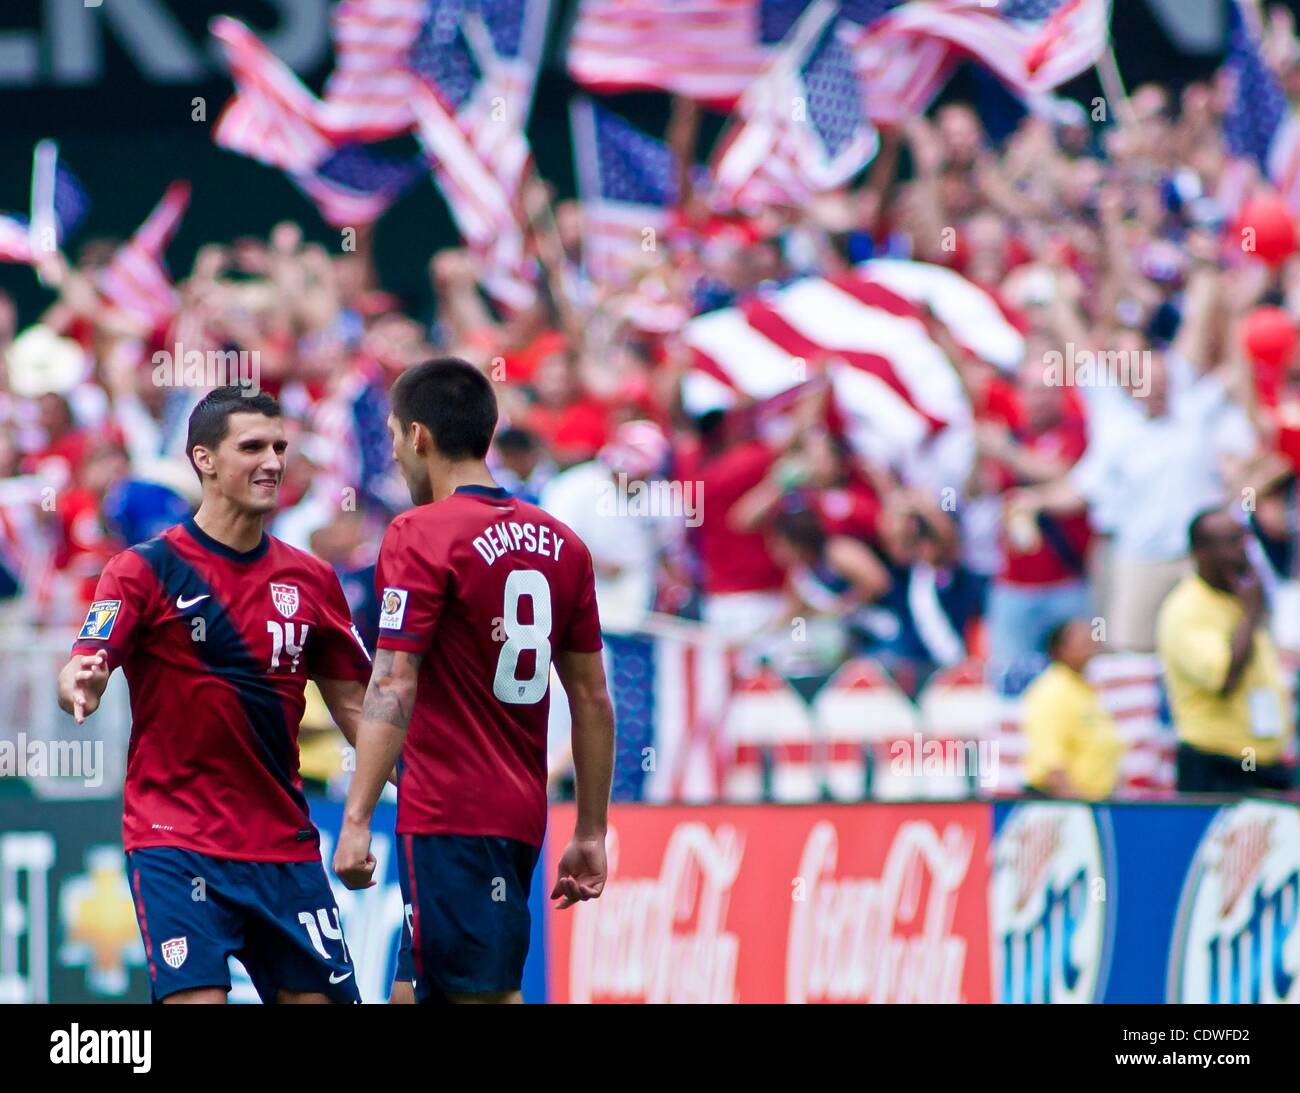 June 16, 2011 - Washington, District of Columbia, United States of America - United States Defender Eric Lichaj #14 and Midfielder Clint Dempsey #8 about to celebrate after Dempsey scores late in the second half. The United State would go on to to defeat Jamaica 2-0 in the concacaf gold cup quarterf Stock Photo